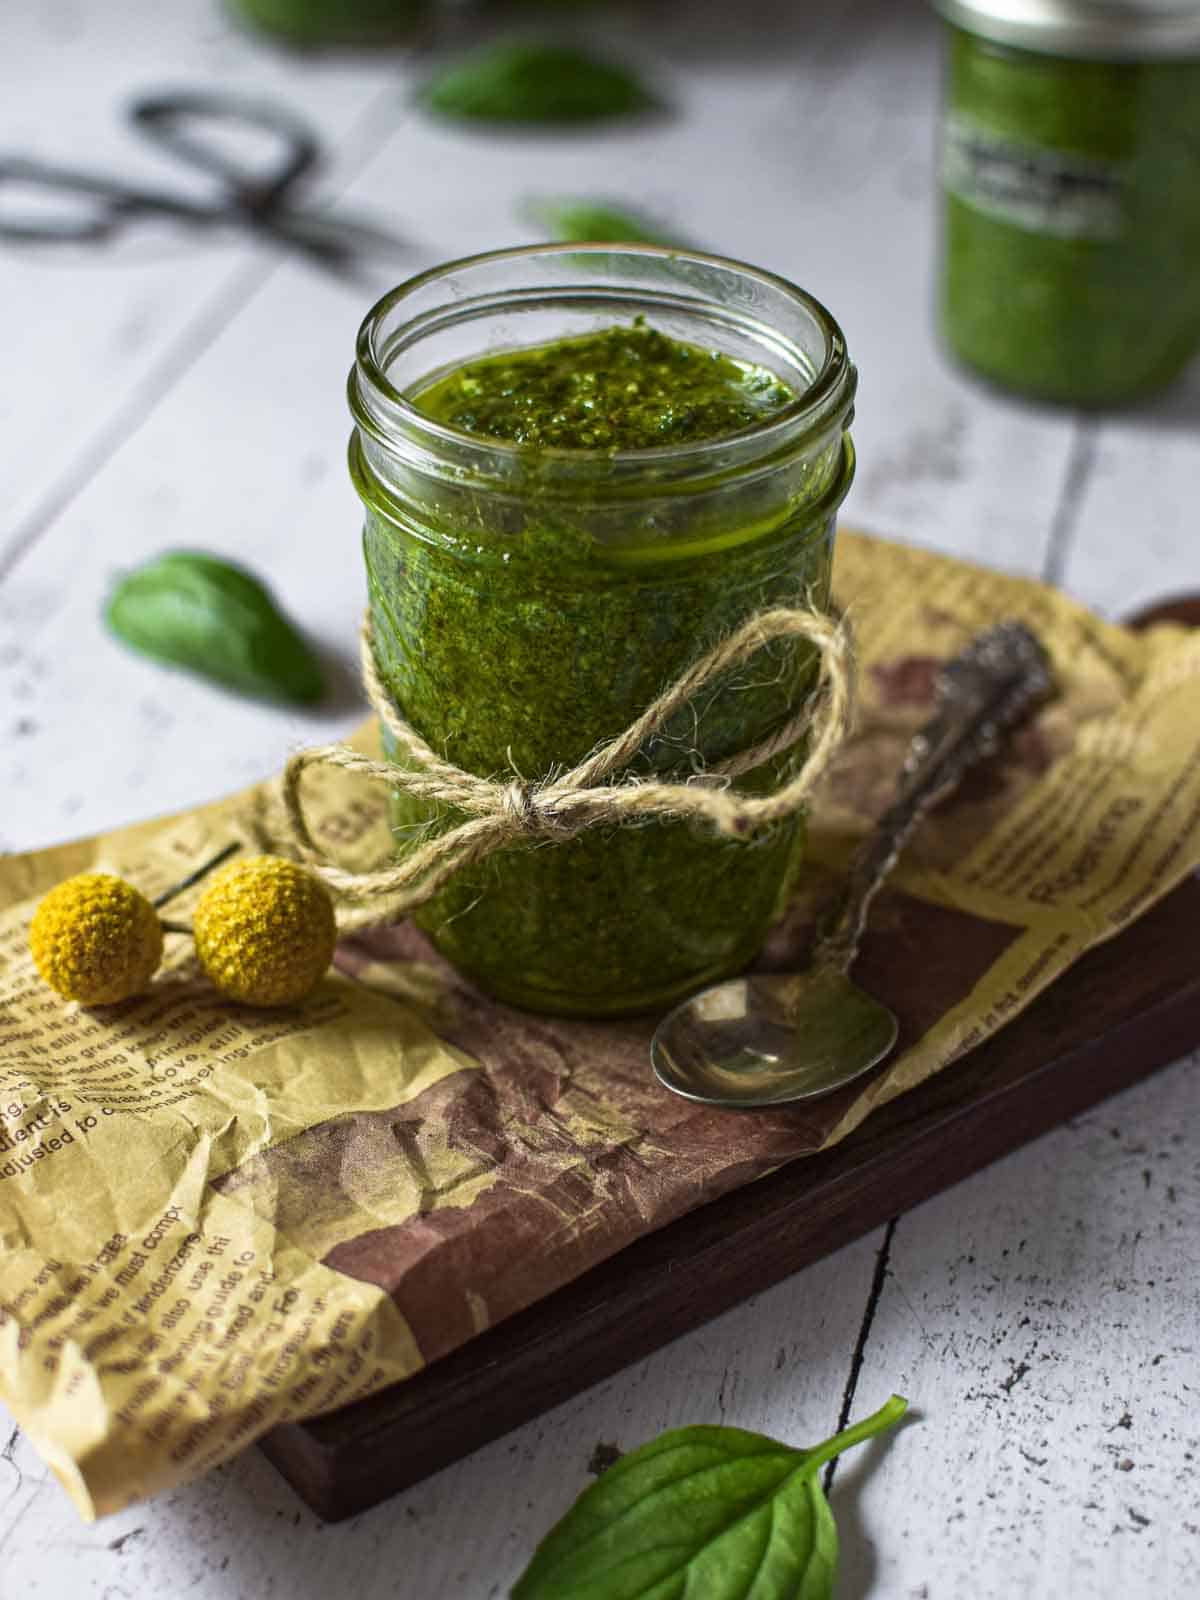 Angled view of pesto sauce in a small clear jar on a wooden surface.